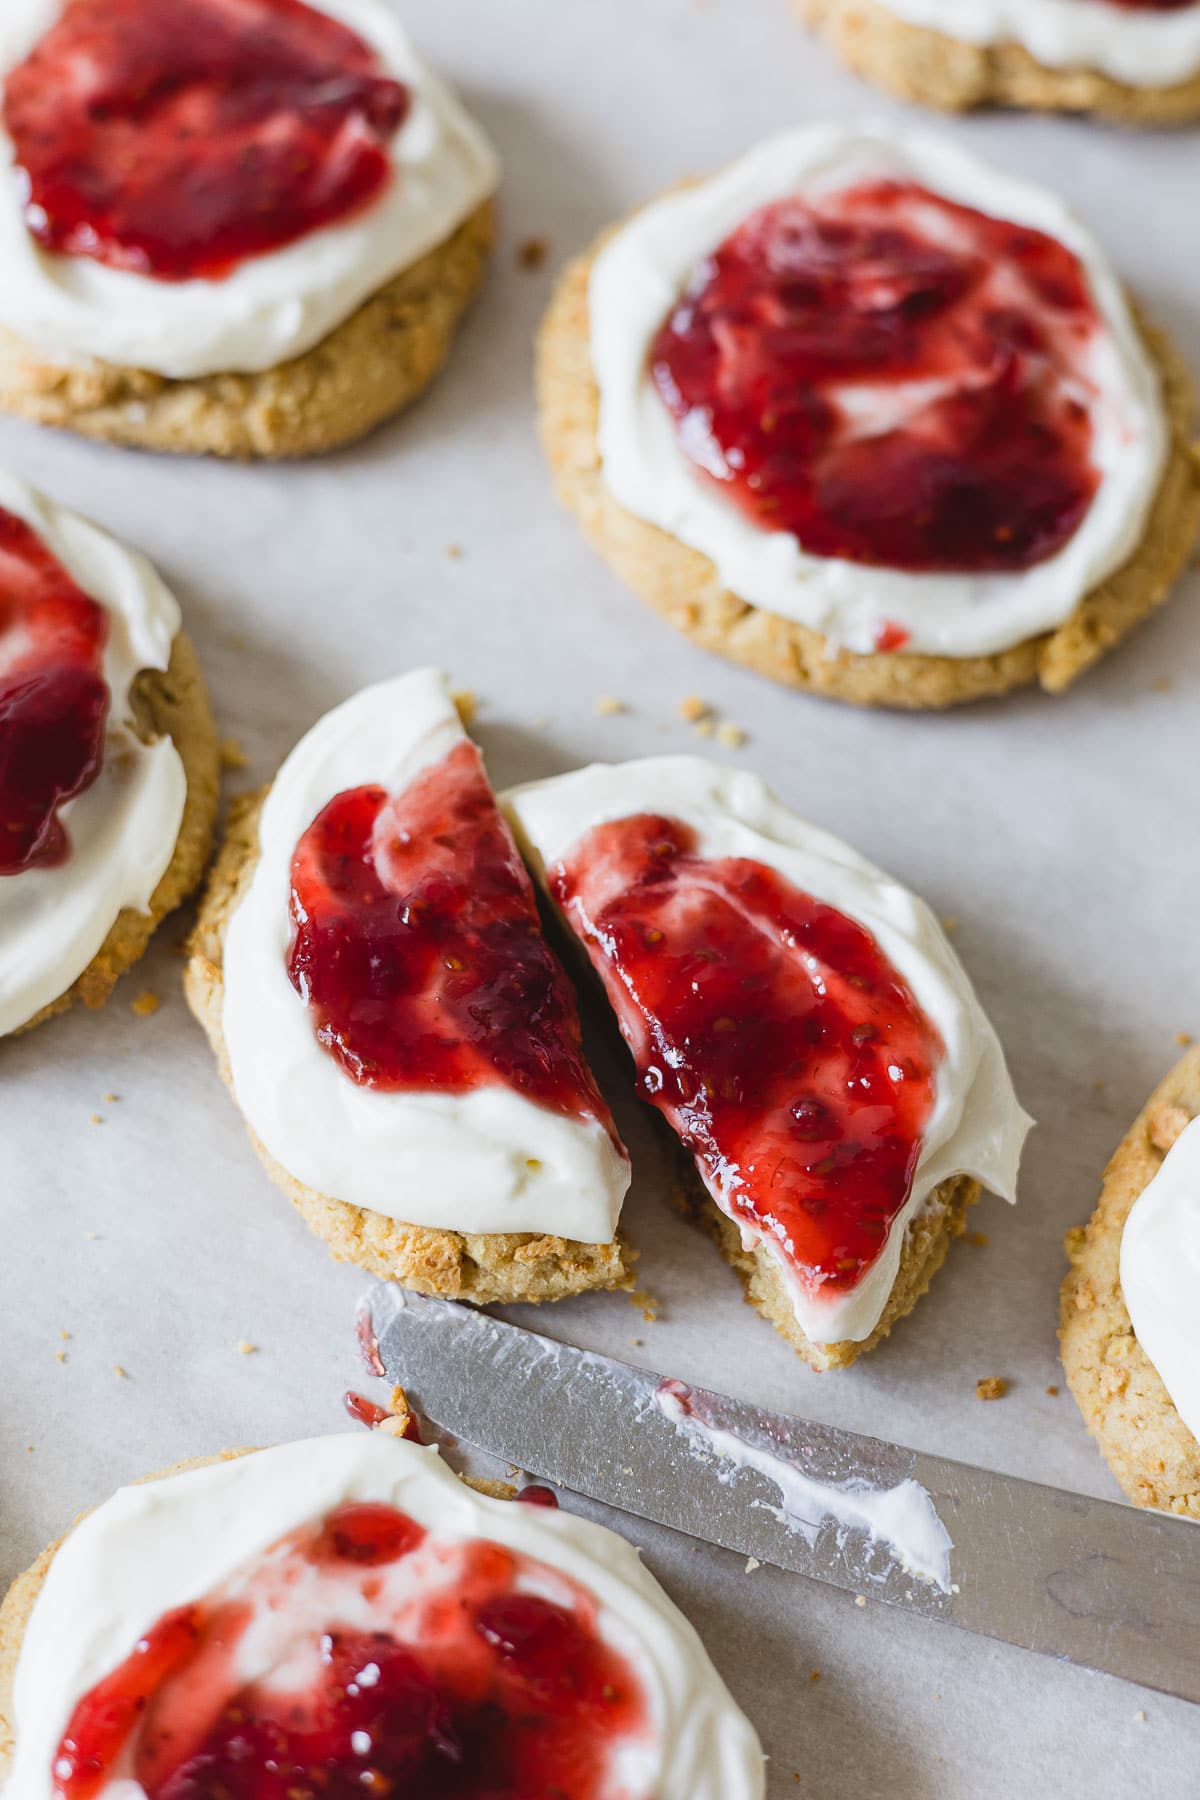 A cookie frosted with a cream cheese topping and raspberry jam cut down the middle with a butter knife.